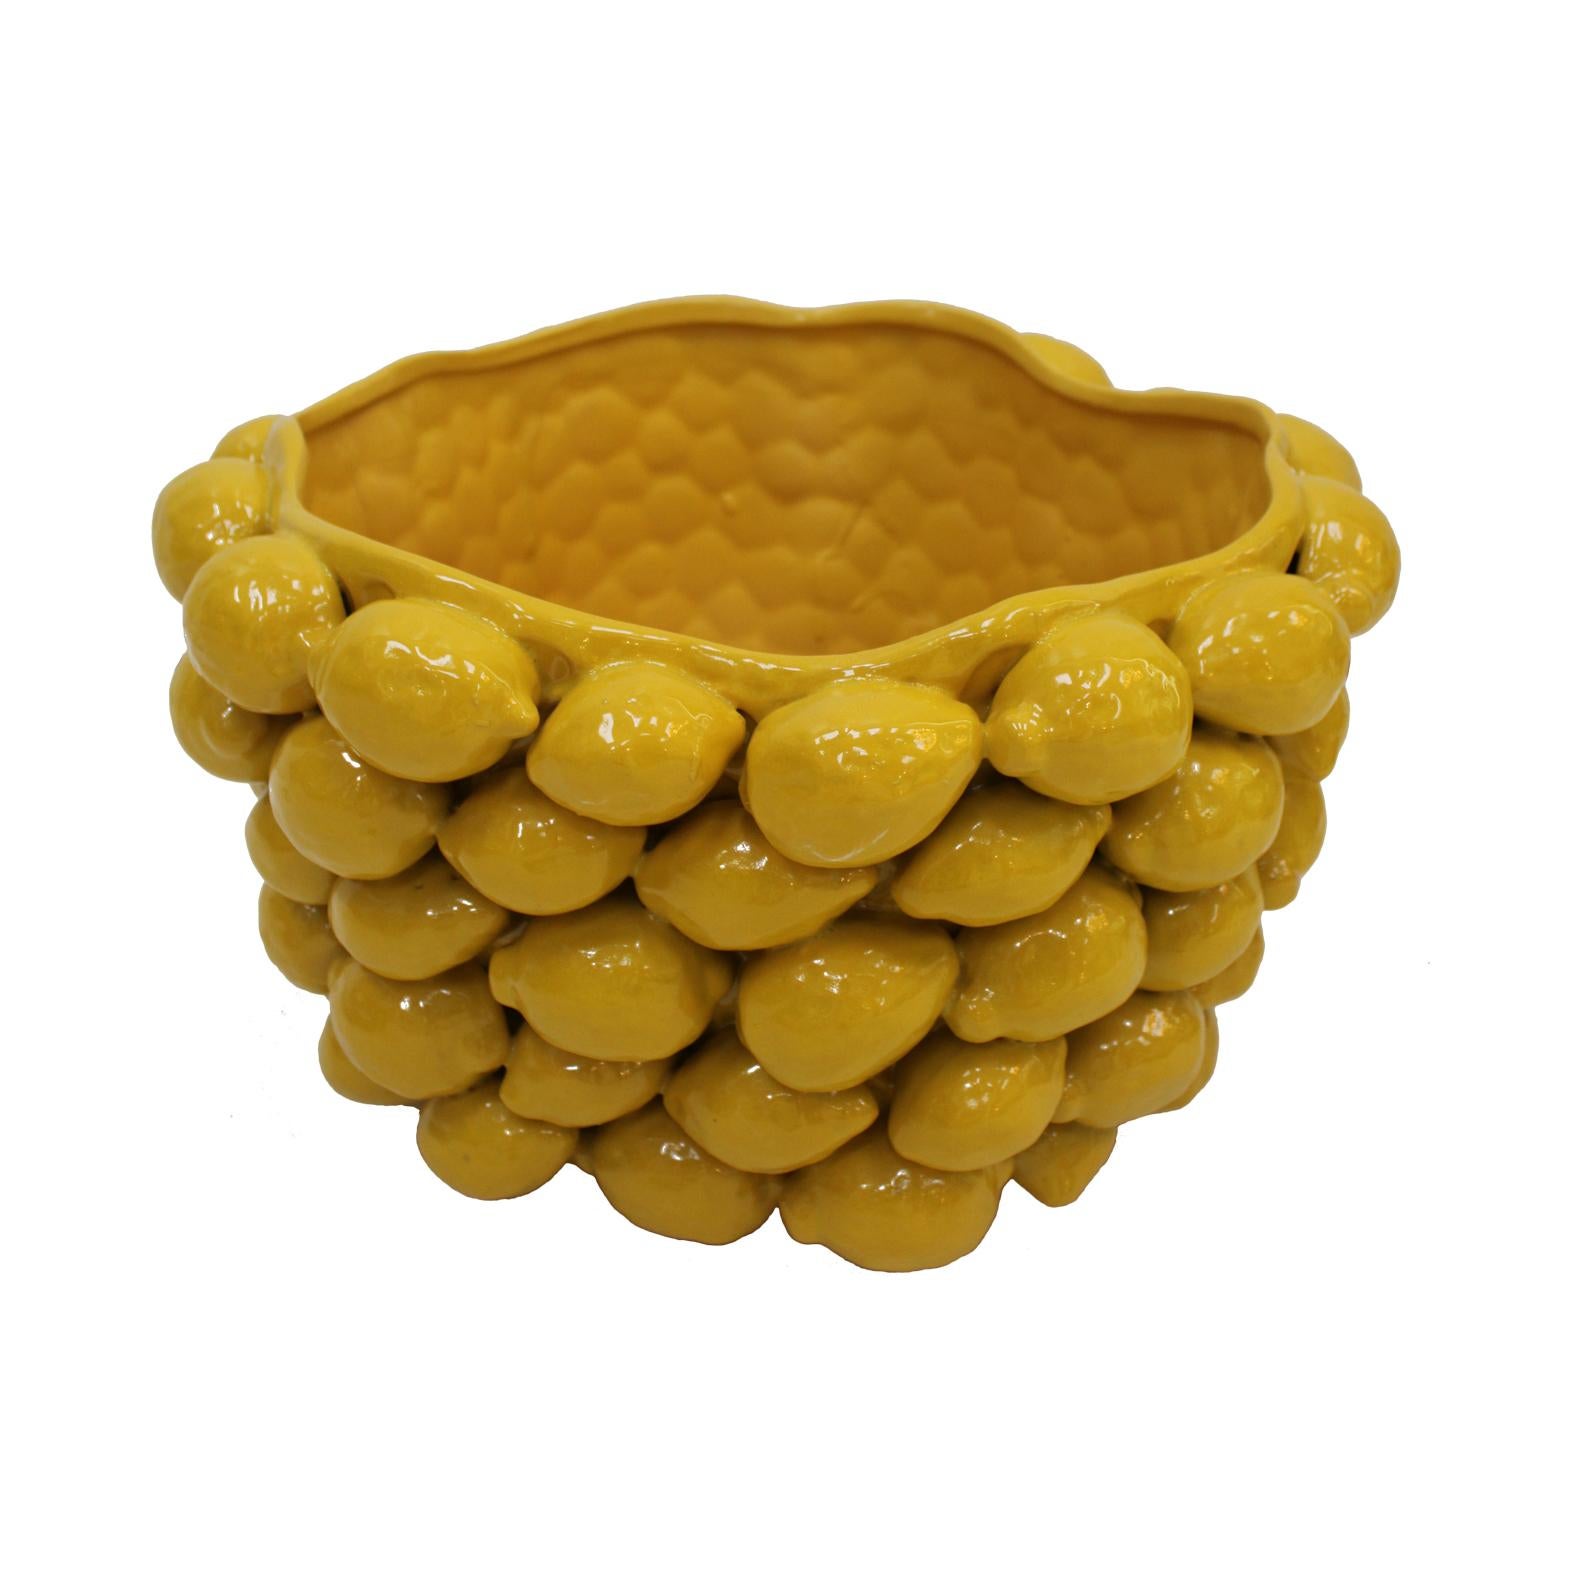 Art vase made by hand in yellow glazed ceramic with traditional lemon motifs from southern Italy.
Contemporary Italian art vase in stock.

Transform your living space with our exquisite contemporary Italian Yellow Fruit Motif Ceramic Vase. Crafted